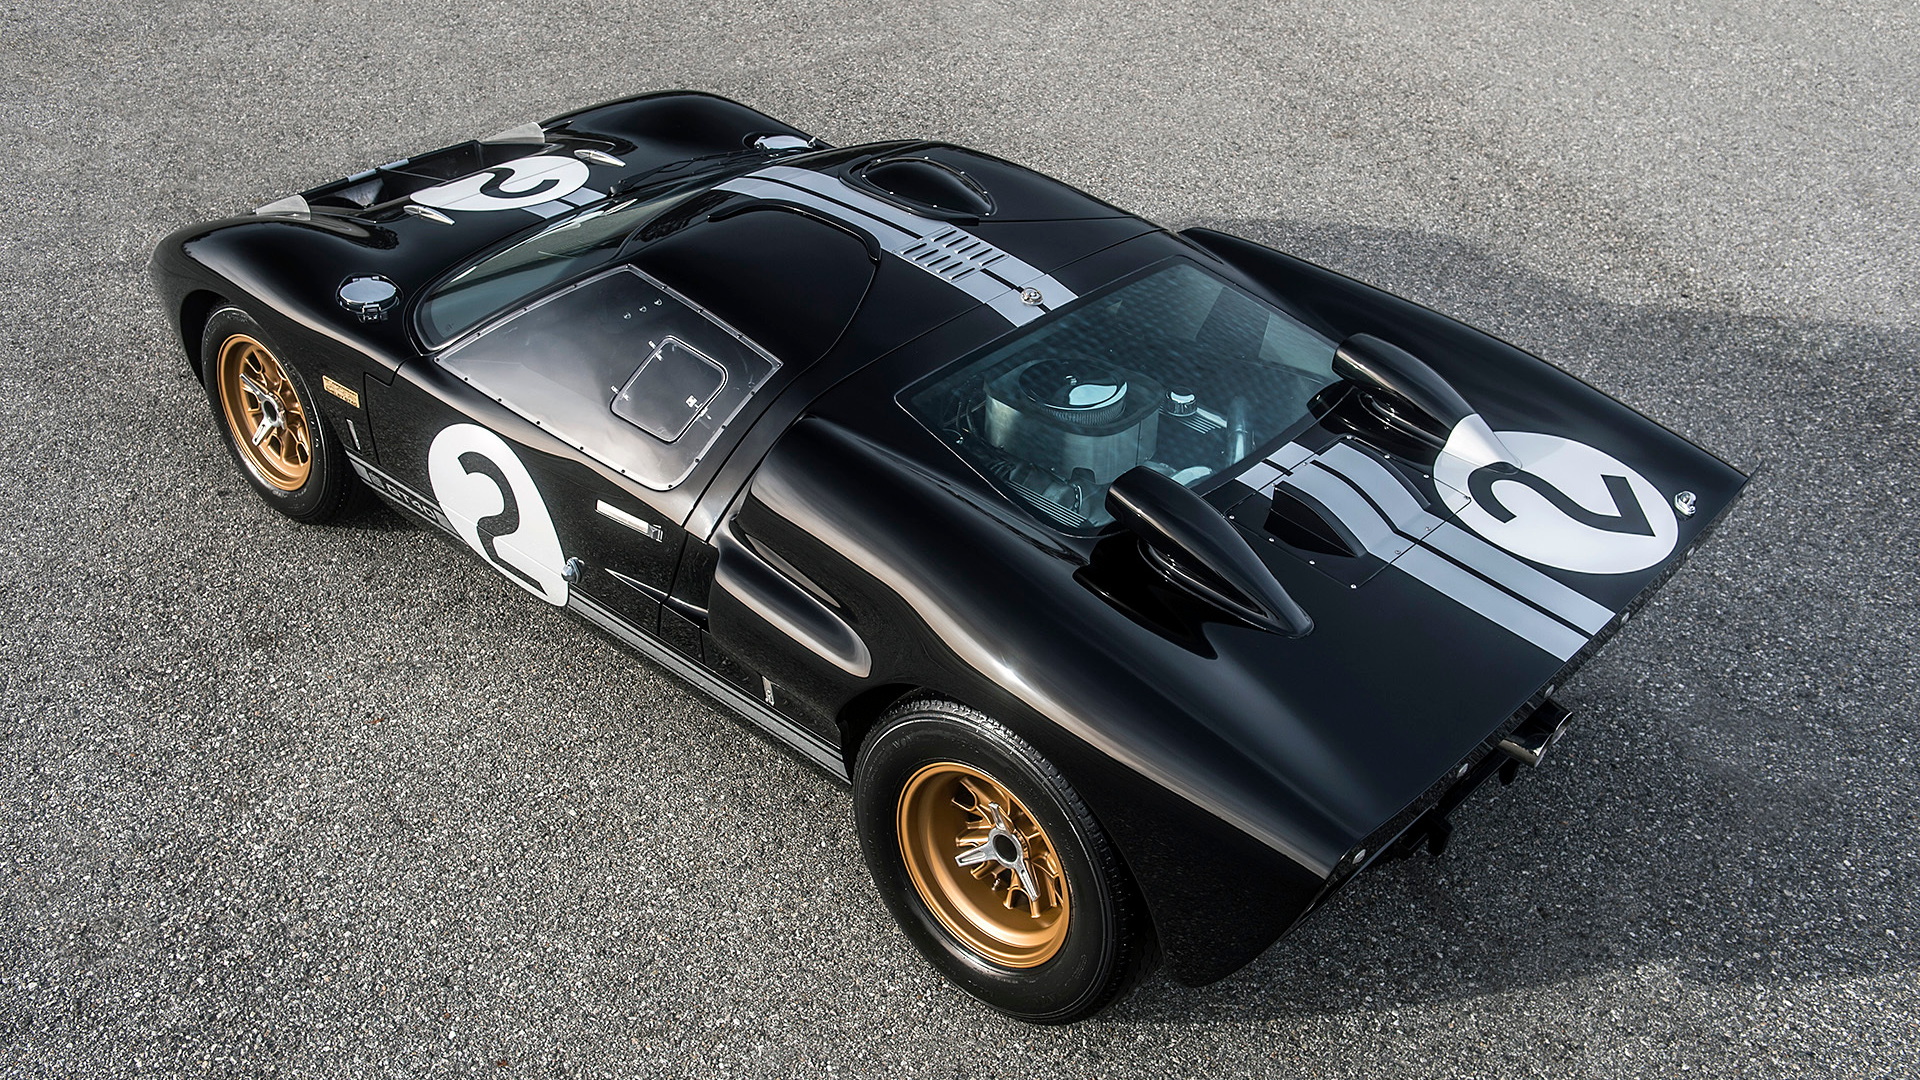 Superformance Rebuilds History With Original Specification 1969 GT40s –  GTPlanet